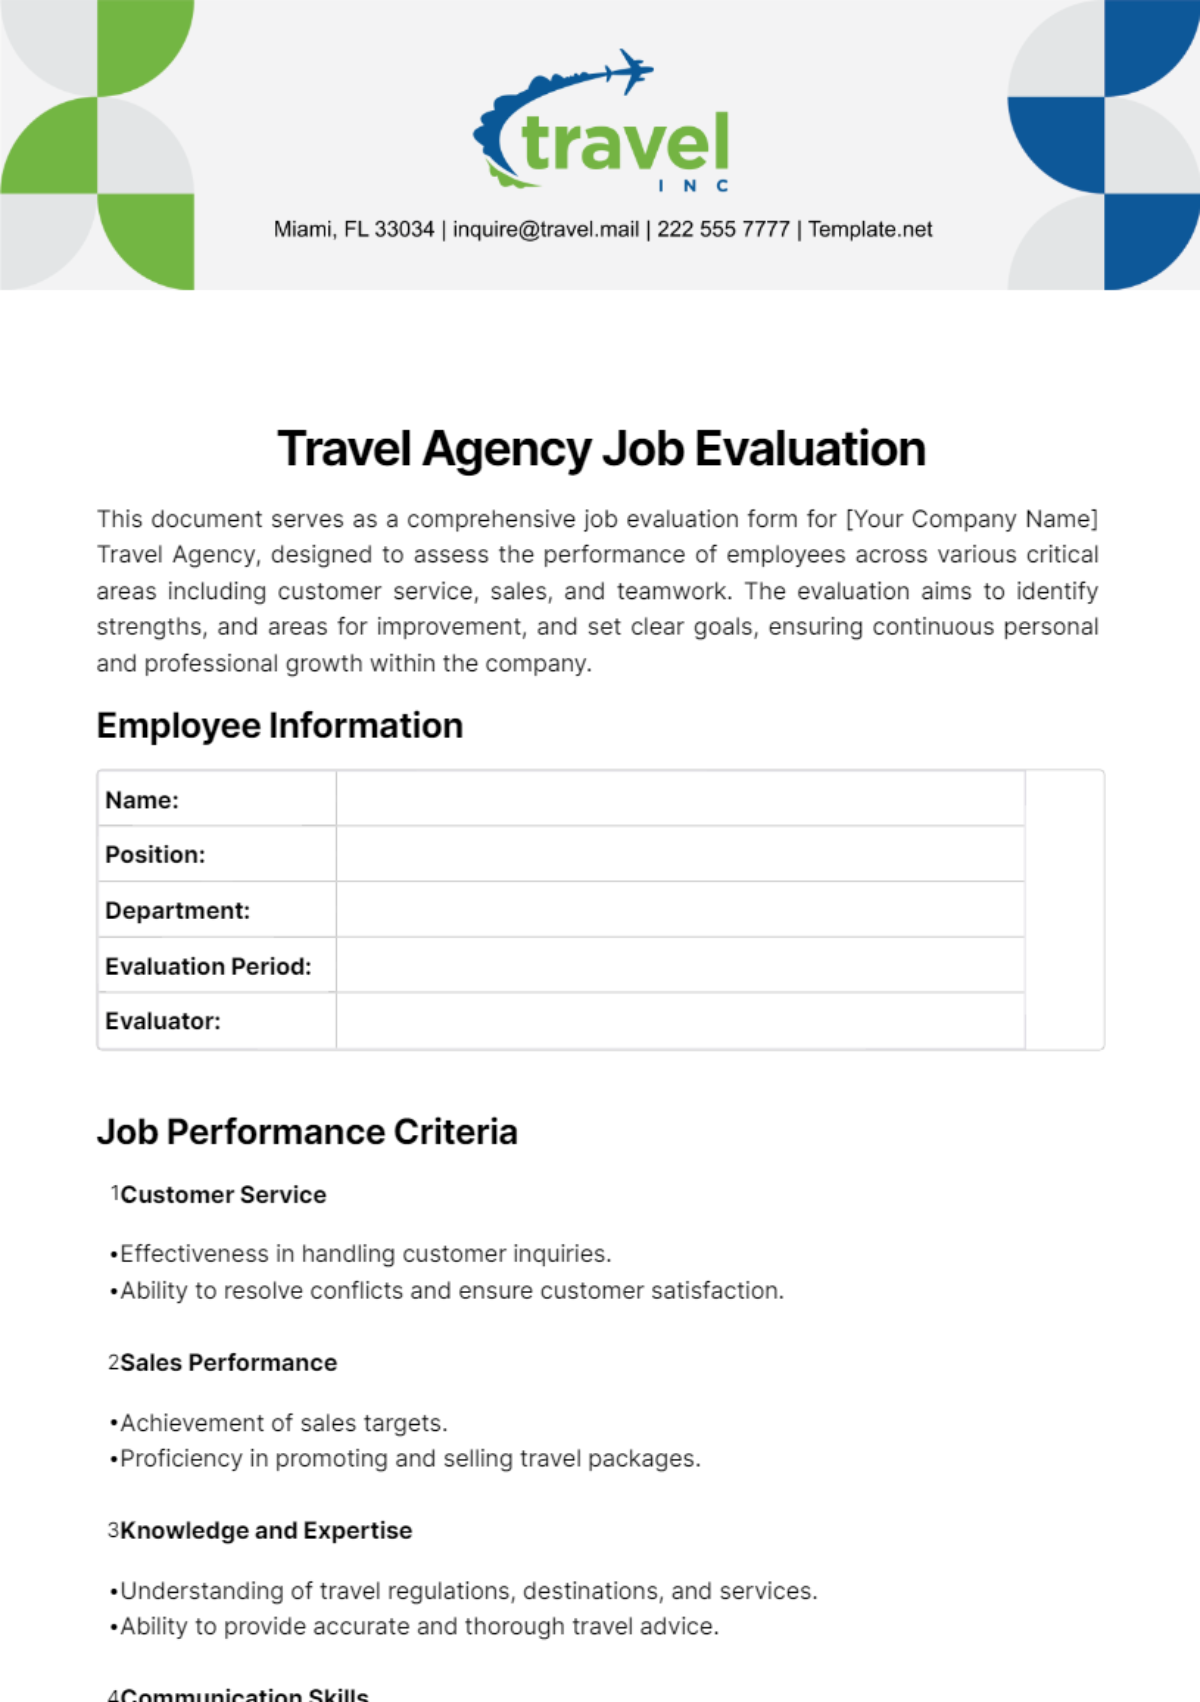 Travel Agency Job Evaluation Template